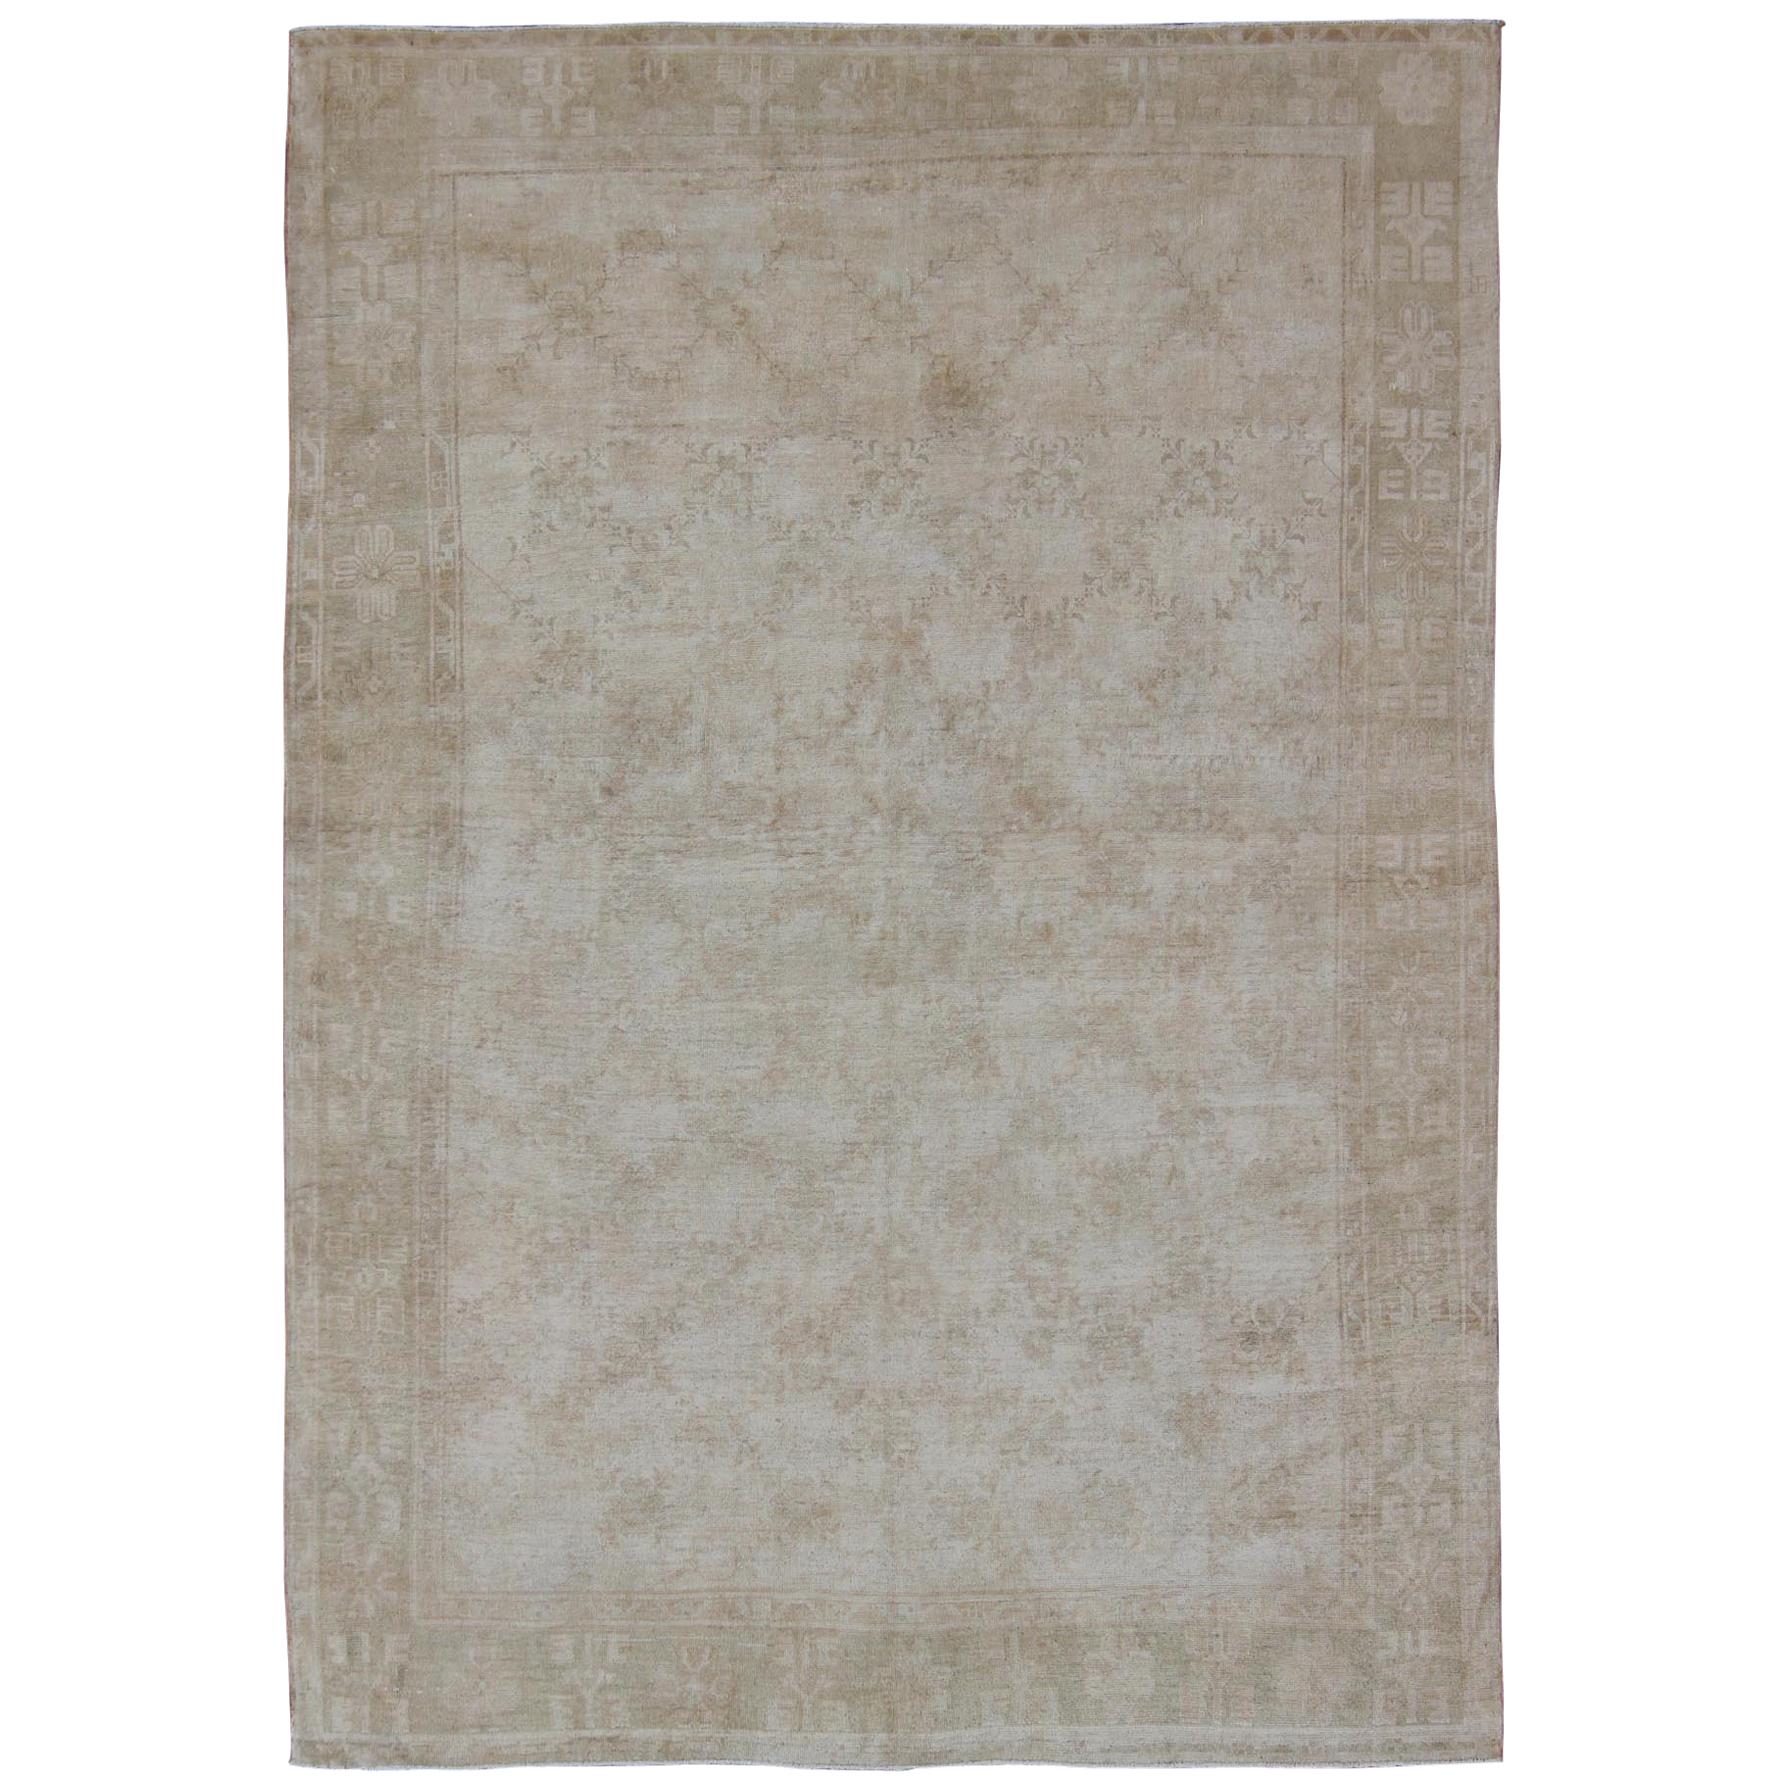 Oushak Rug with Light Color Palette and Repeating Flower Pattern For Sale